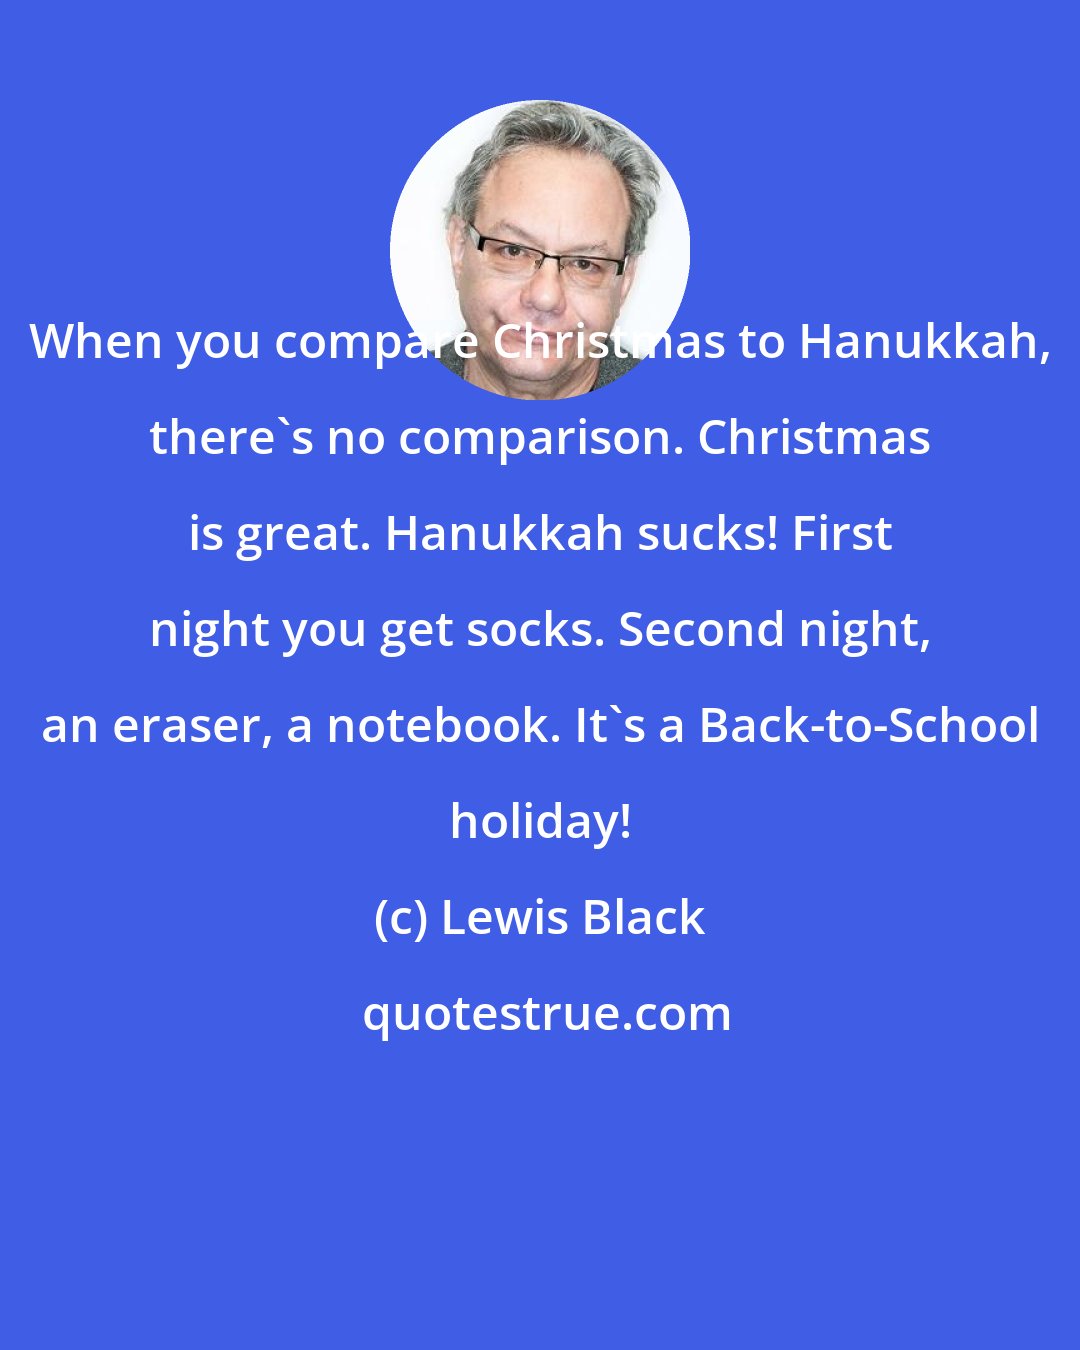 Lewis Black: When you compare Christmas to Hanukkah, there's no comparison. Christmas is great. Hanukkah sucks! First night you get socks. Second night, an eraser, a notebook. It's a Back-to-School holiday!